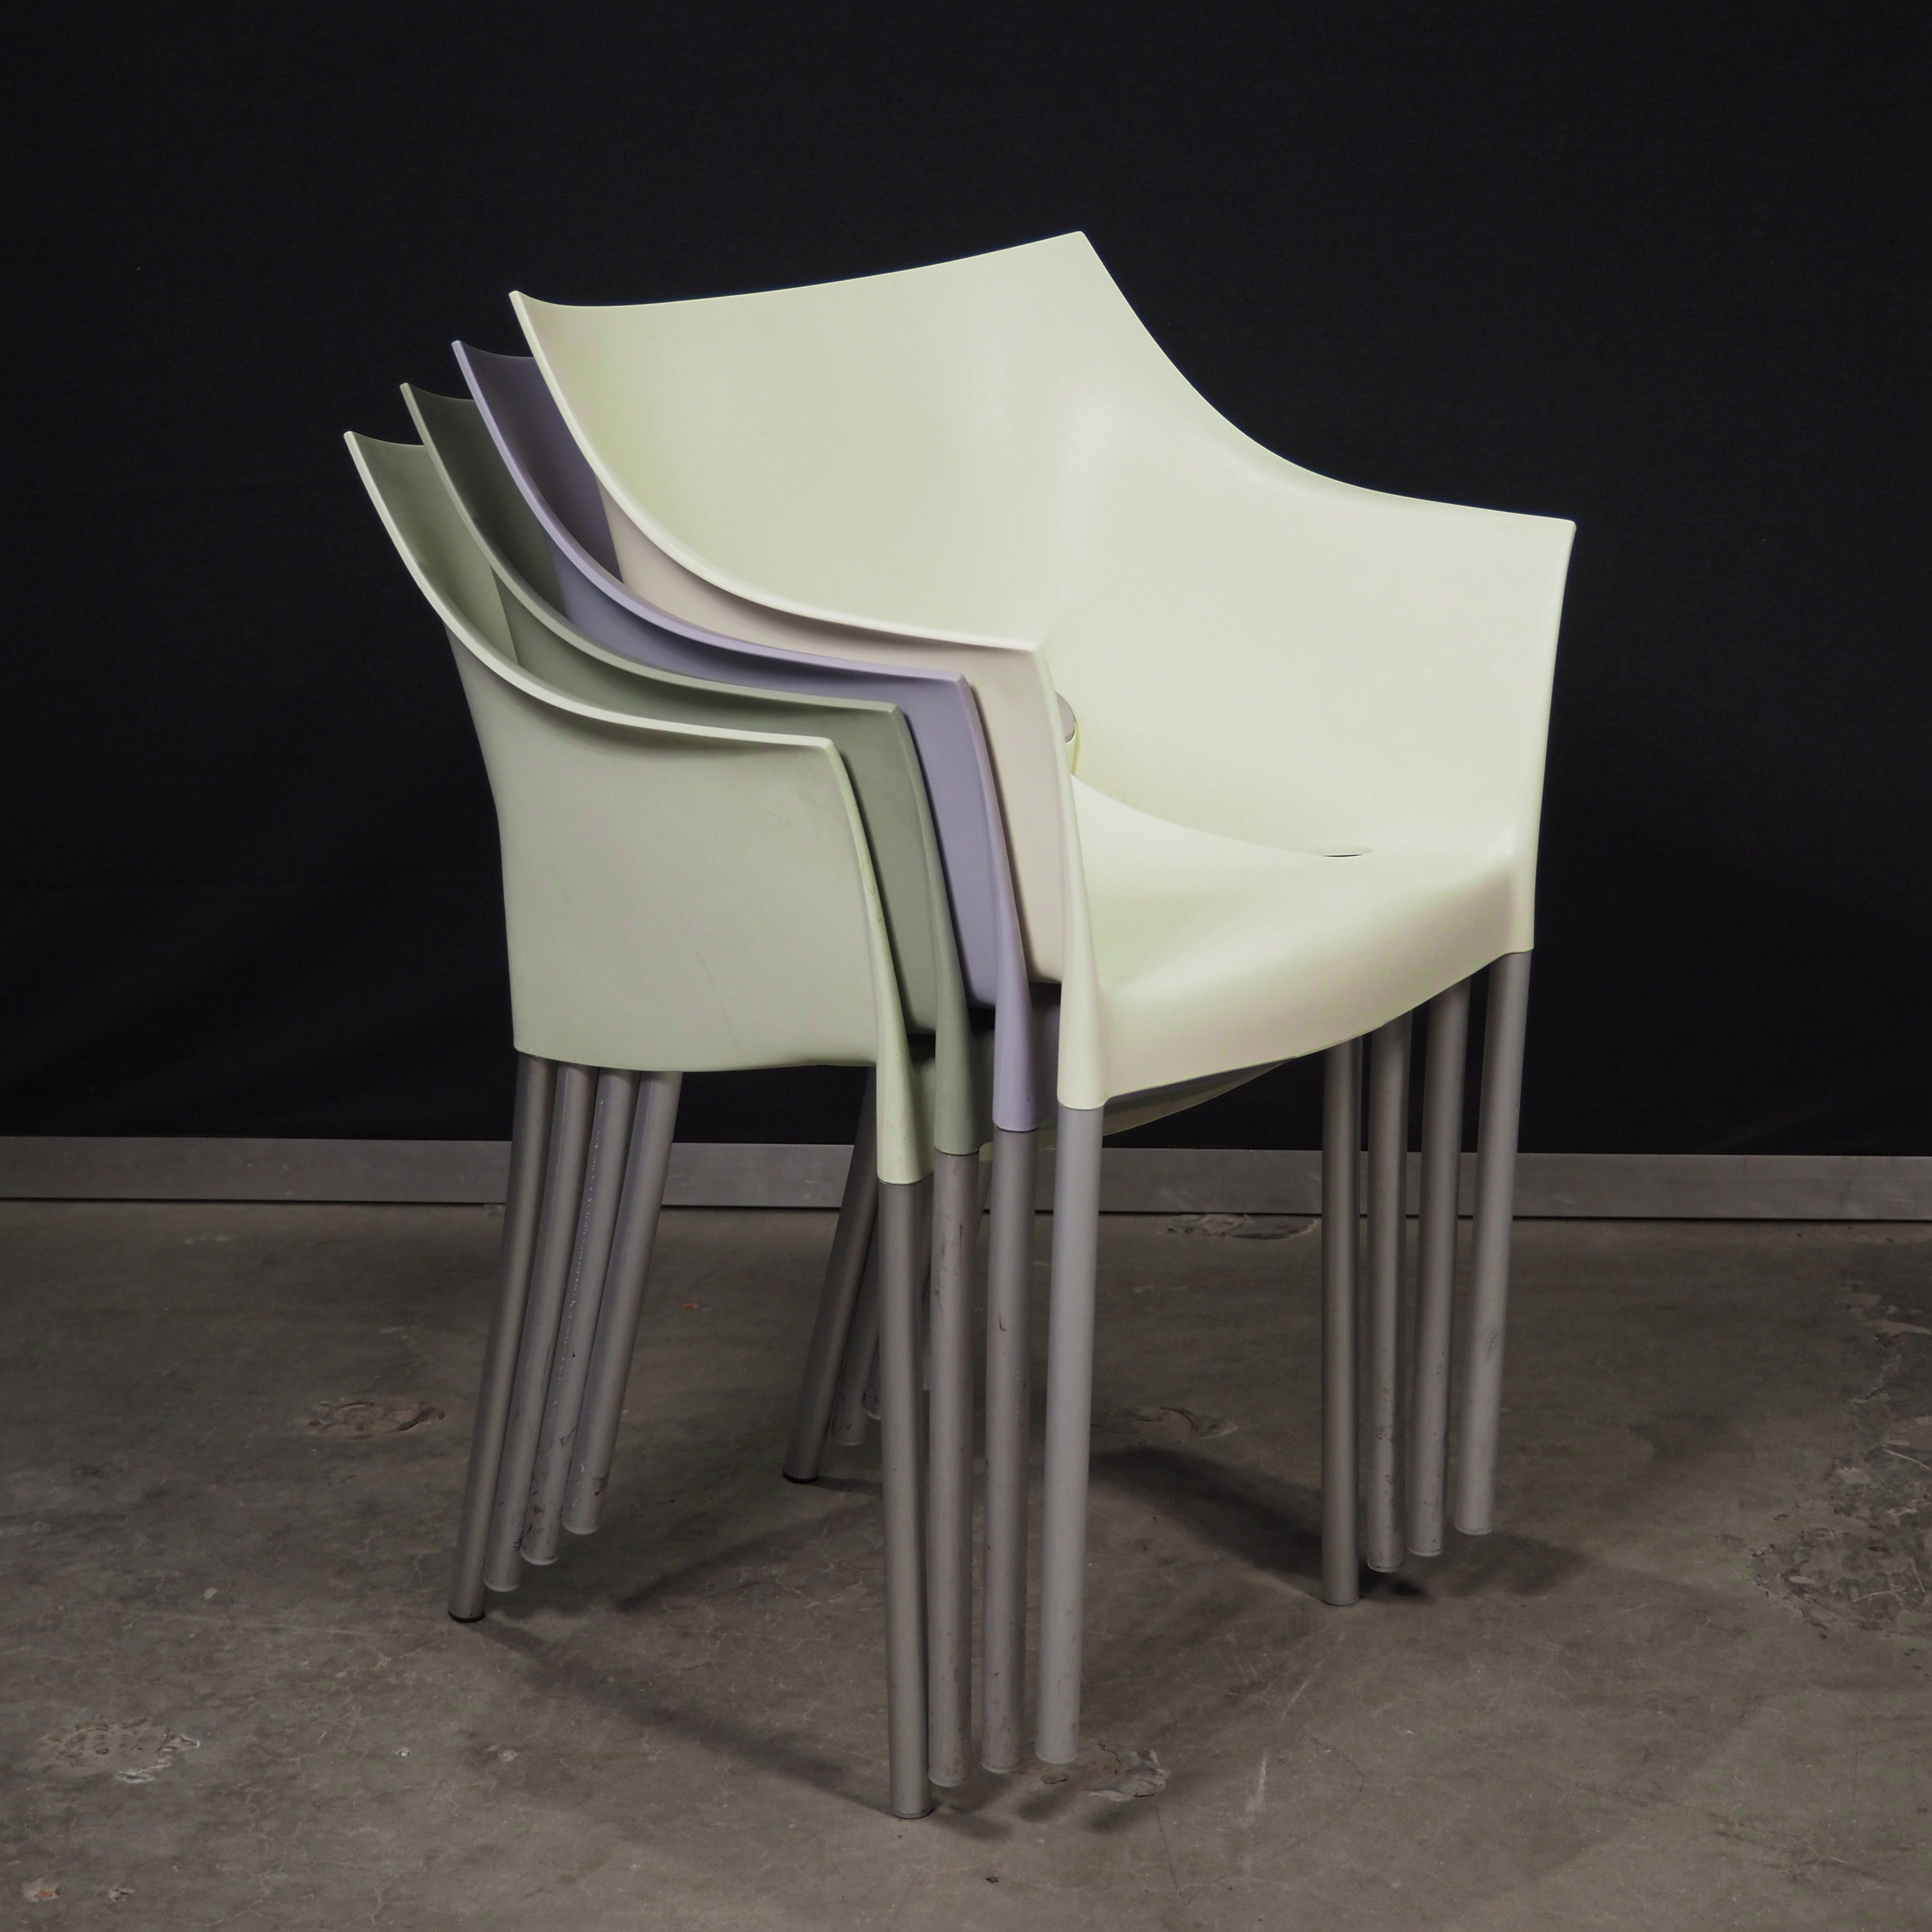 Armchair 'Dr. NO' by Philippe Starck for Kartell (ca. 1997) - Light grey